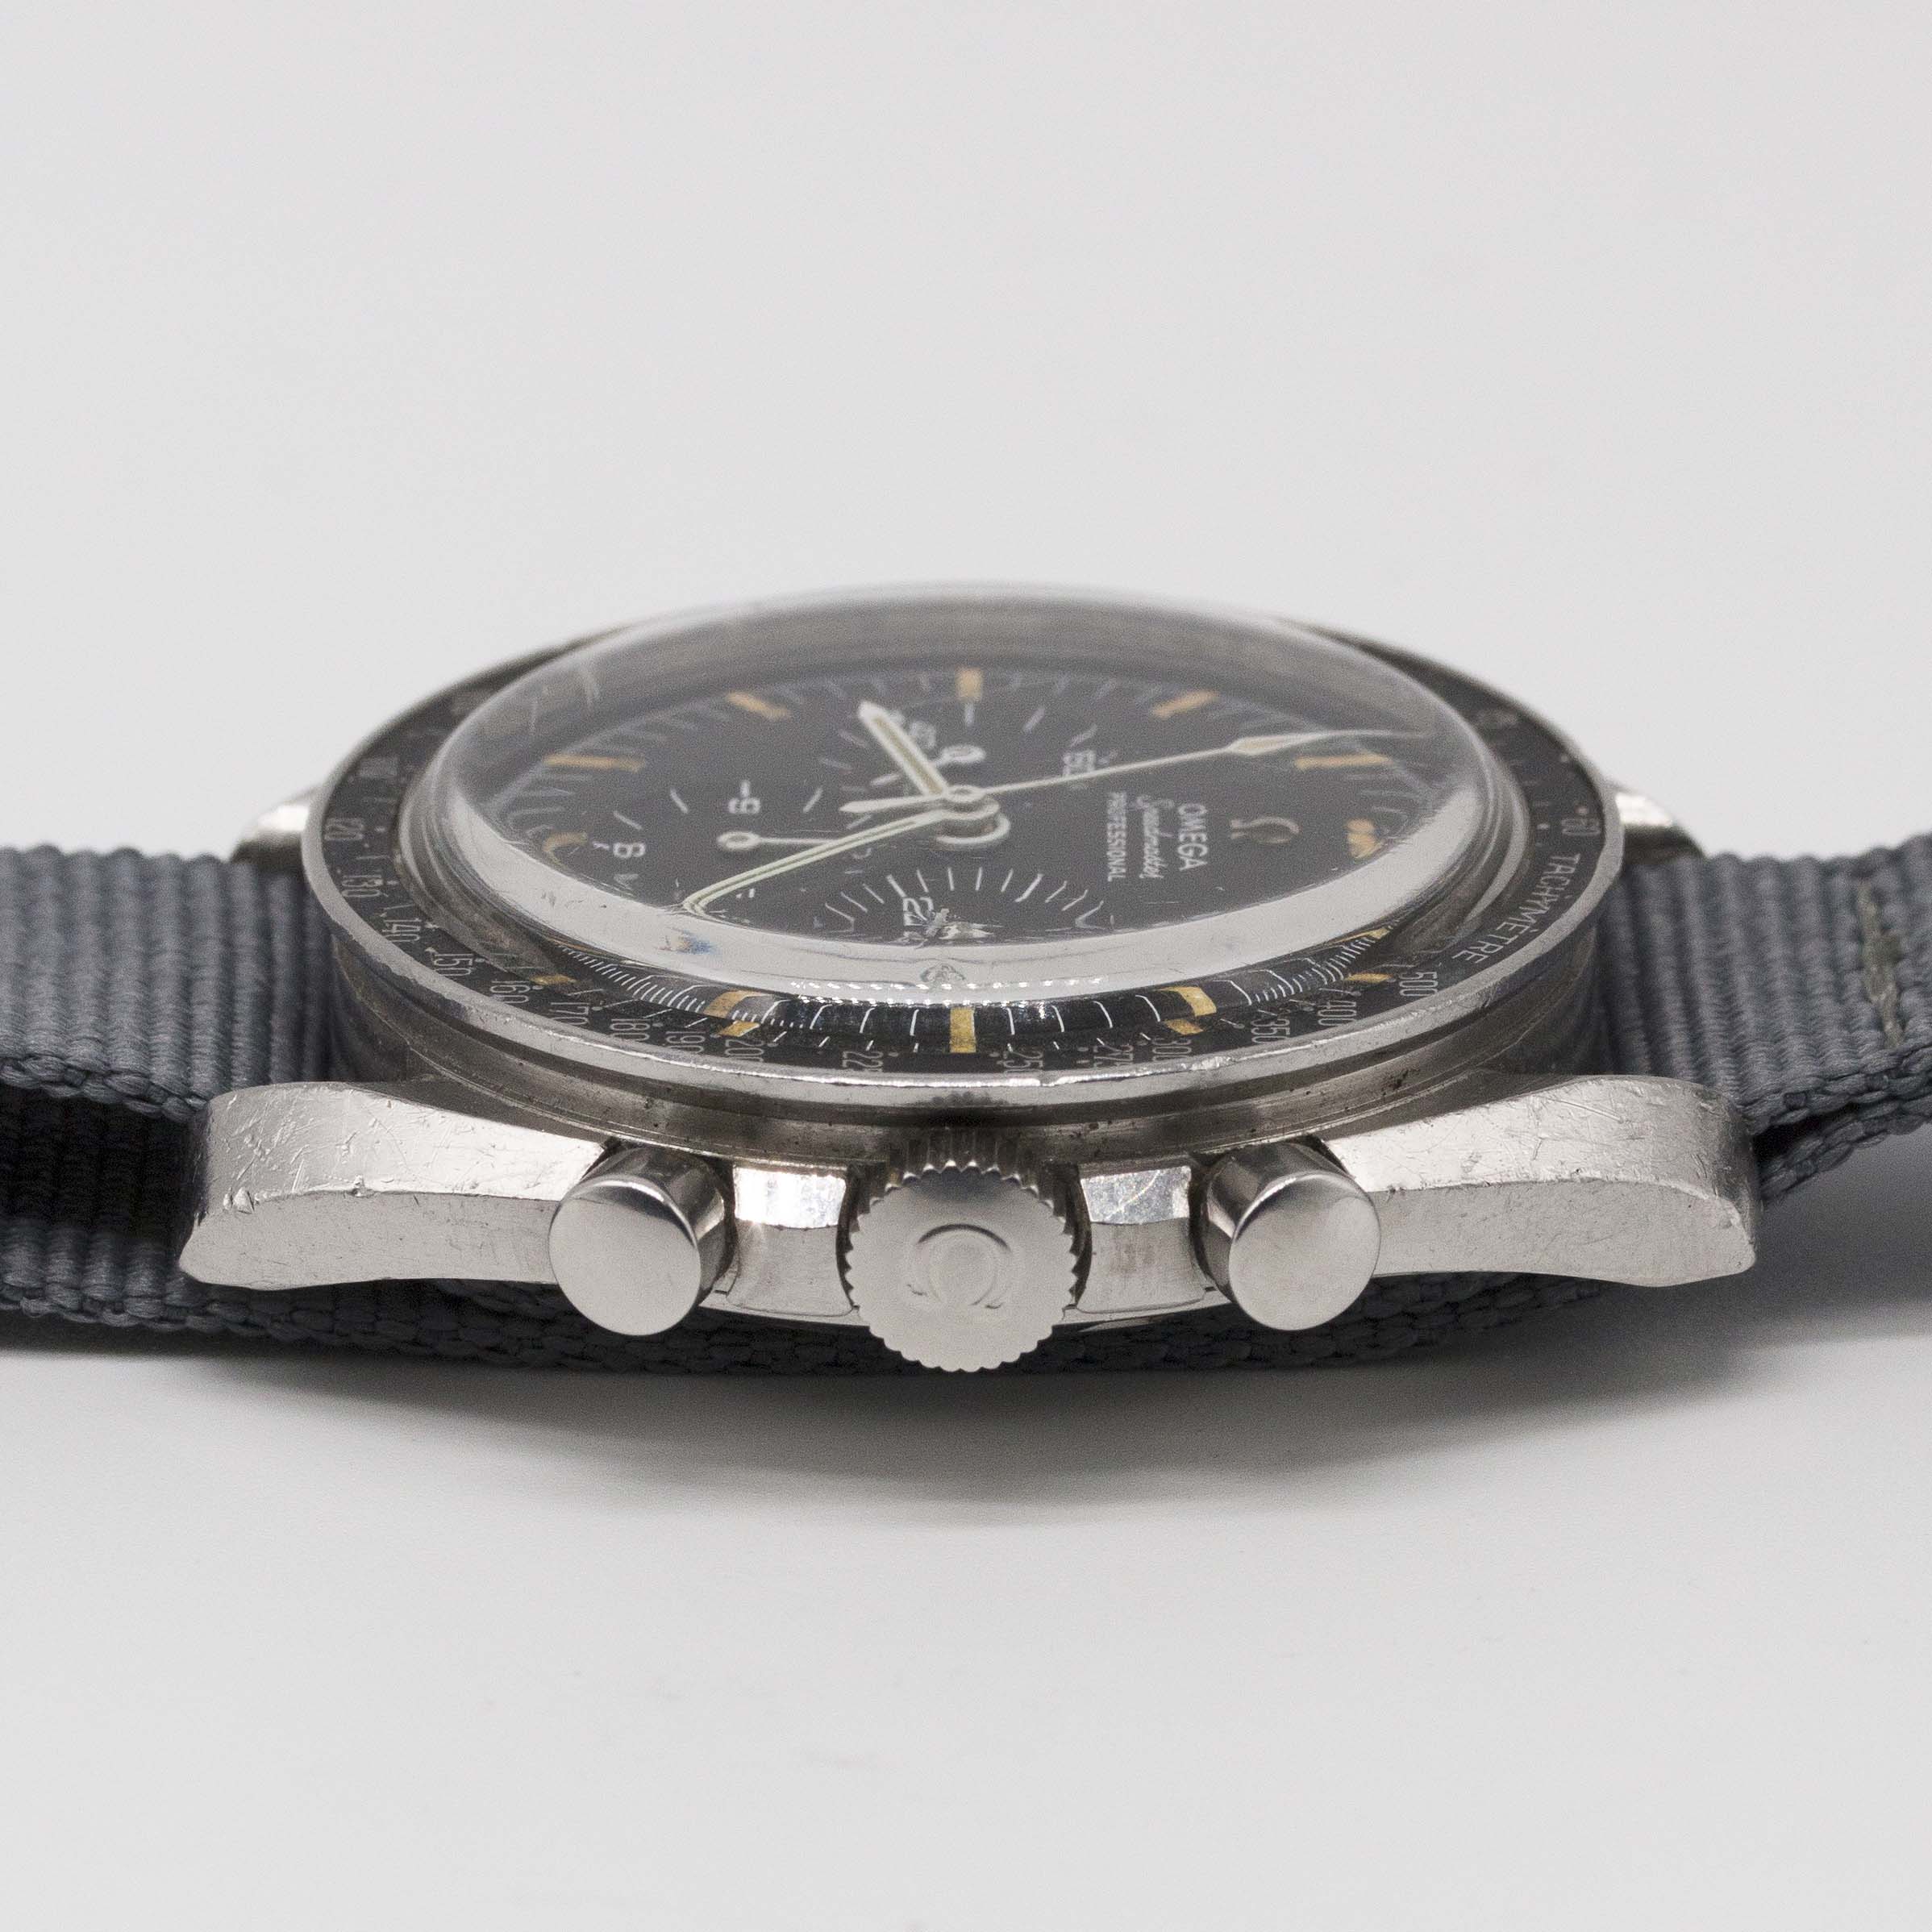 A RARE GENTLEMAN'S STAINLESS STEEL OMEGA SPEEDMASTER PROFESSIONAL "PRE MOON" CHRONOGRAPH WRIST WATCH - Image 10 of 11